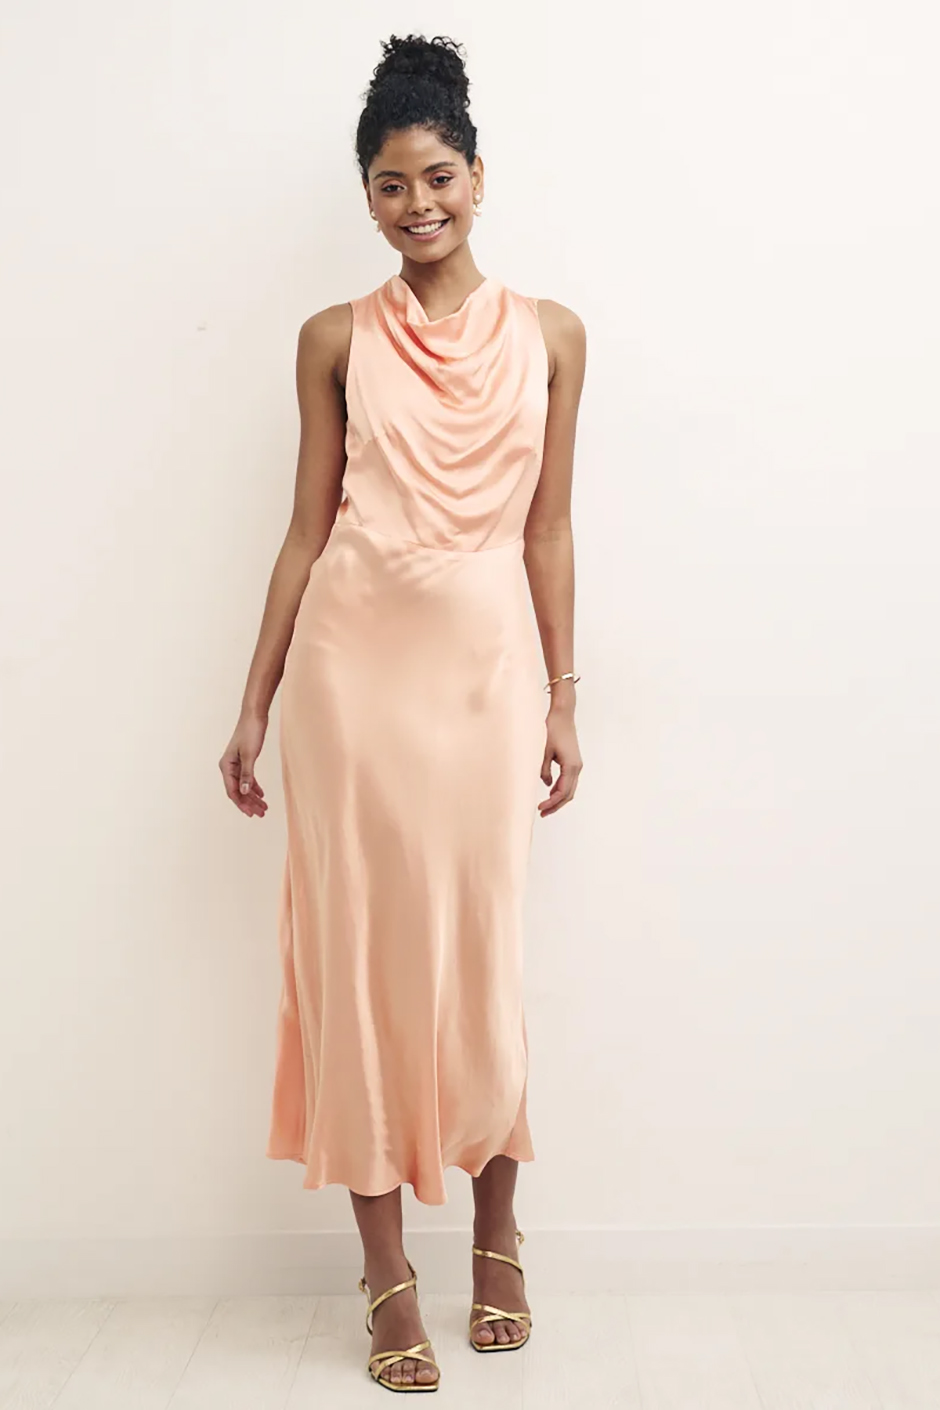 Peach satin bridesmaid dress with draped neckline from Nobody's Child